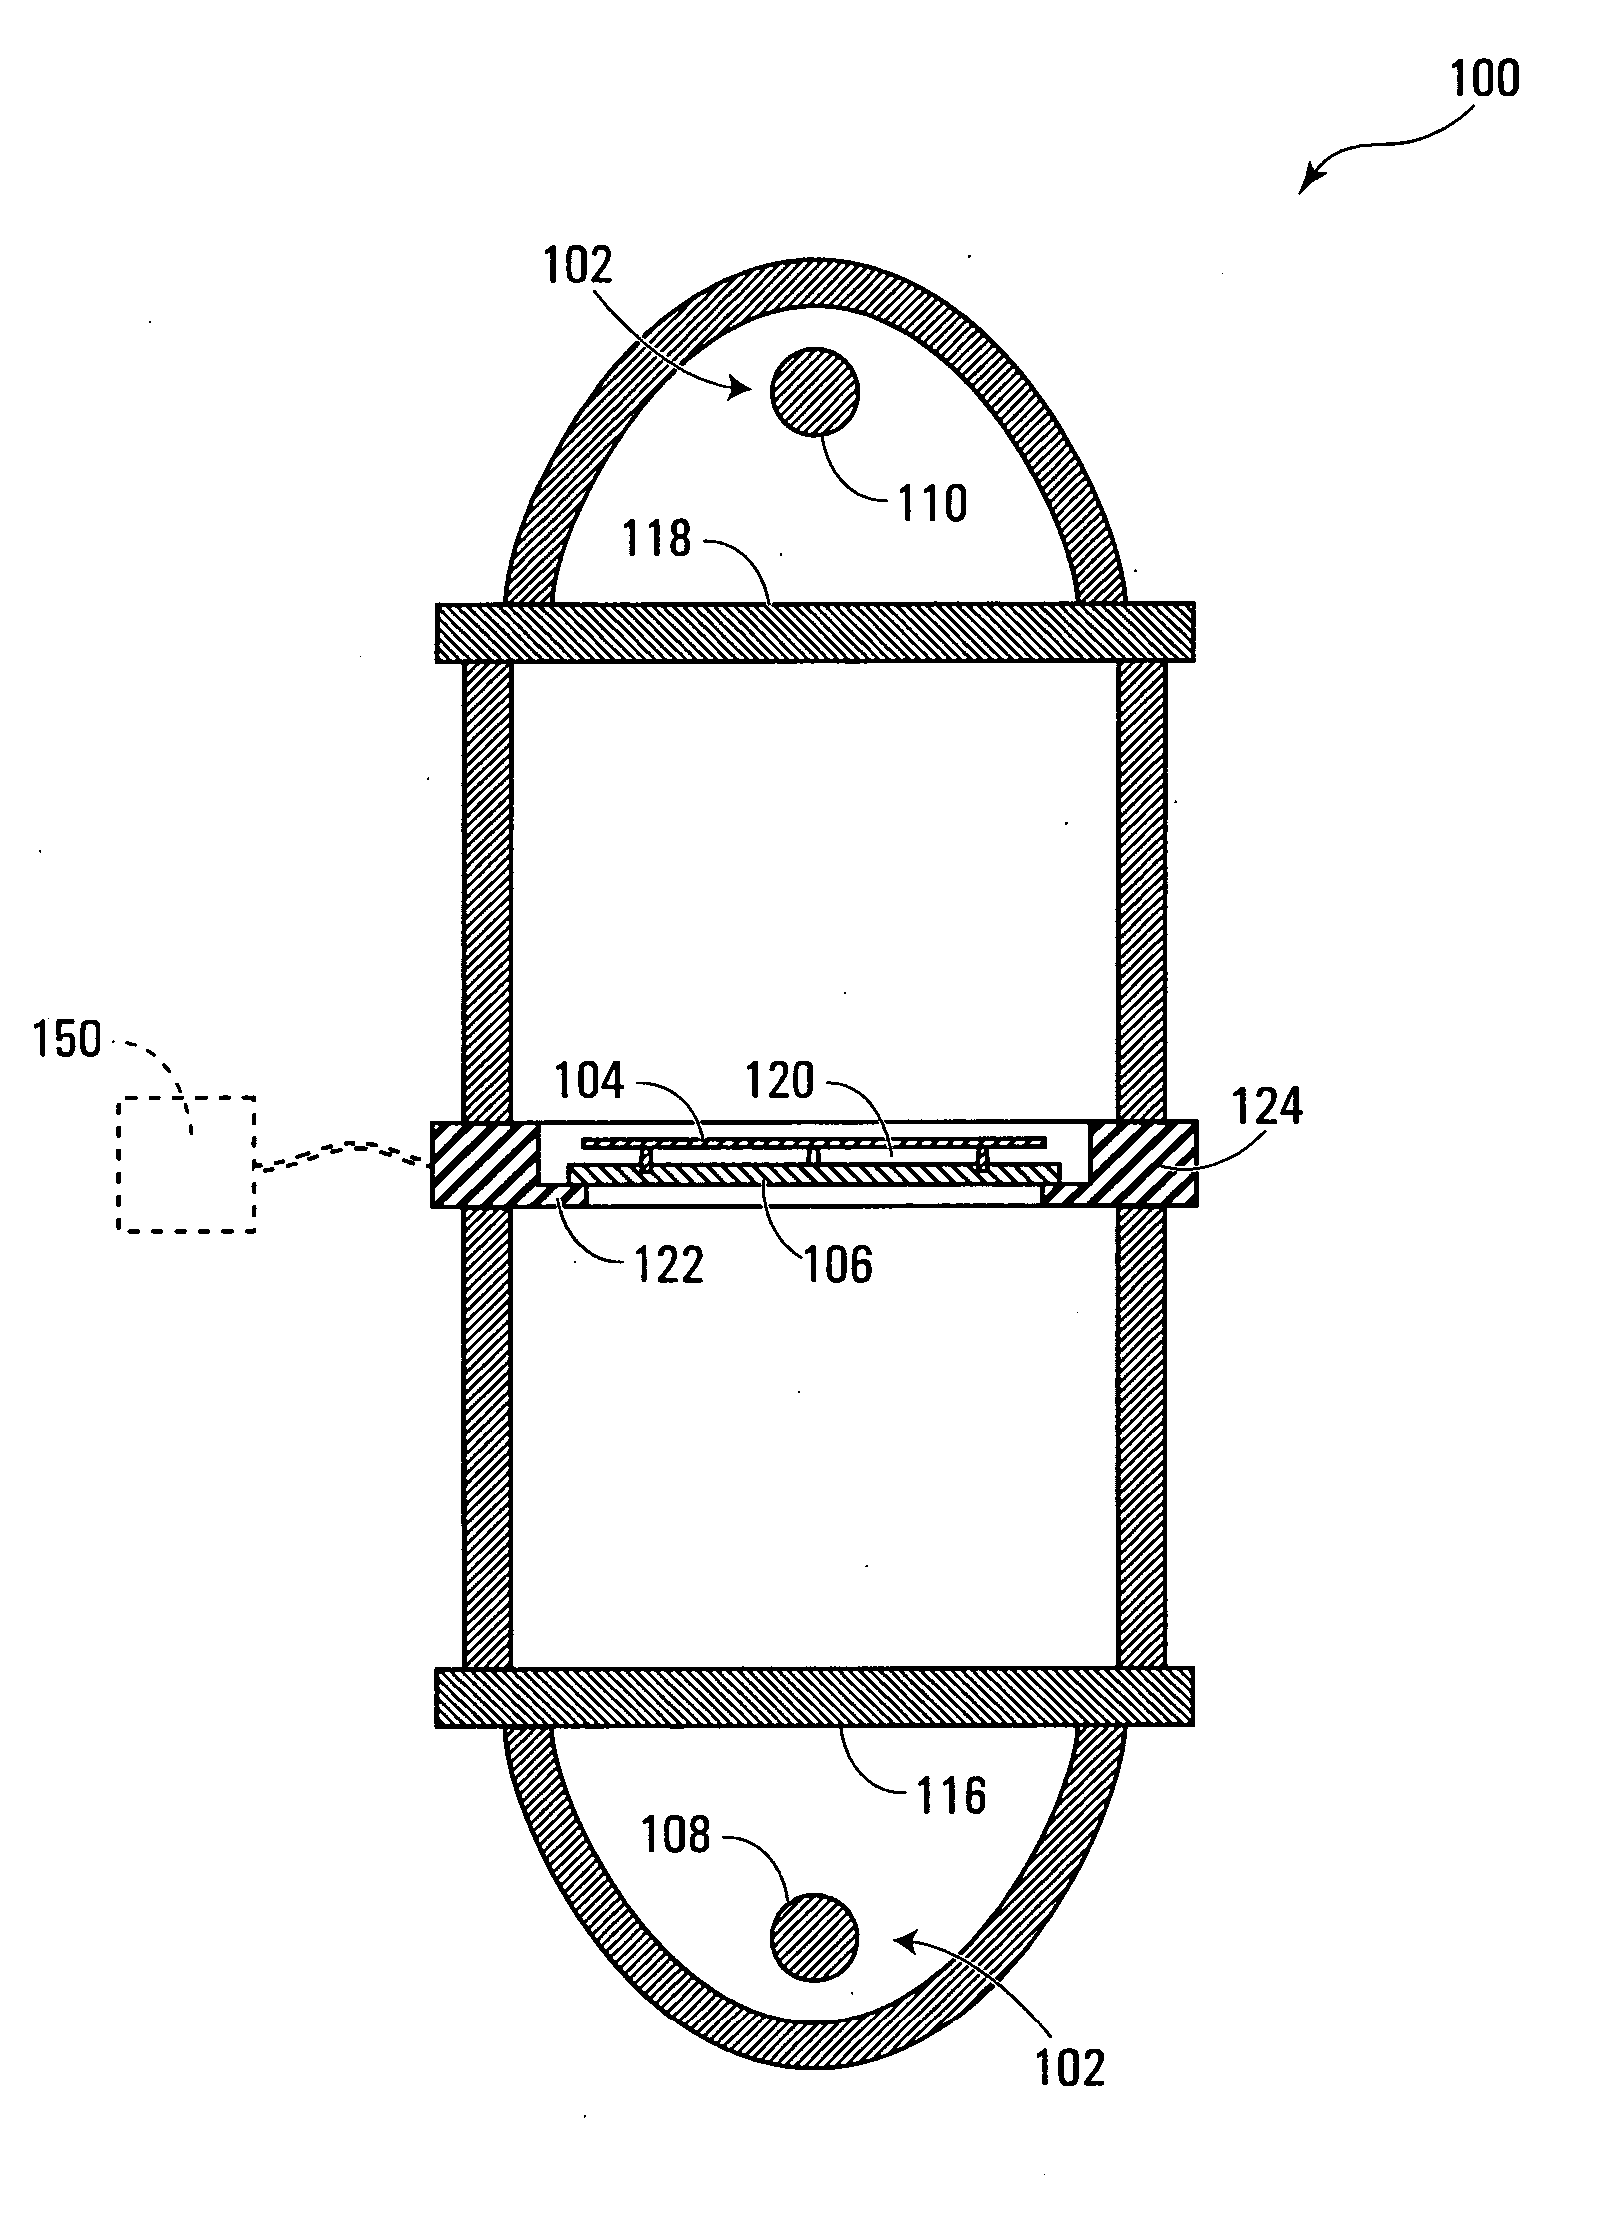 Apparatuses and methods for suppressing thermally-induced motion of a workpiece